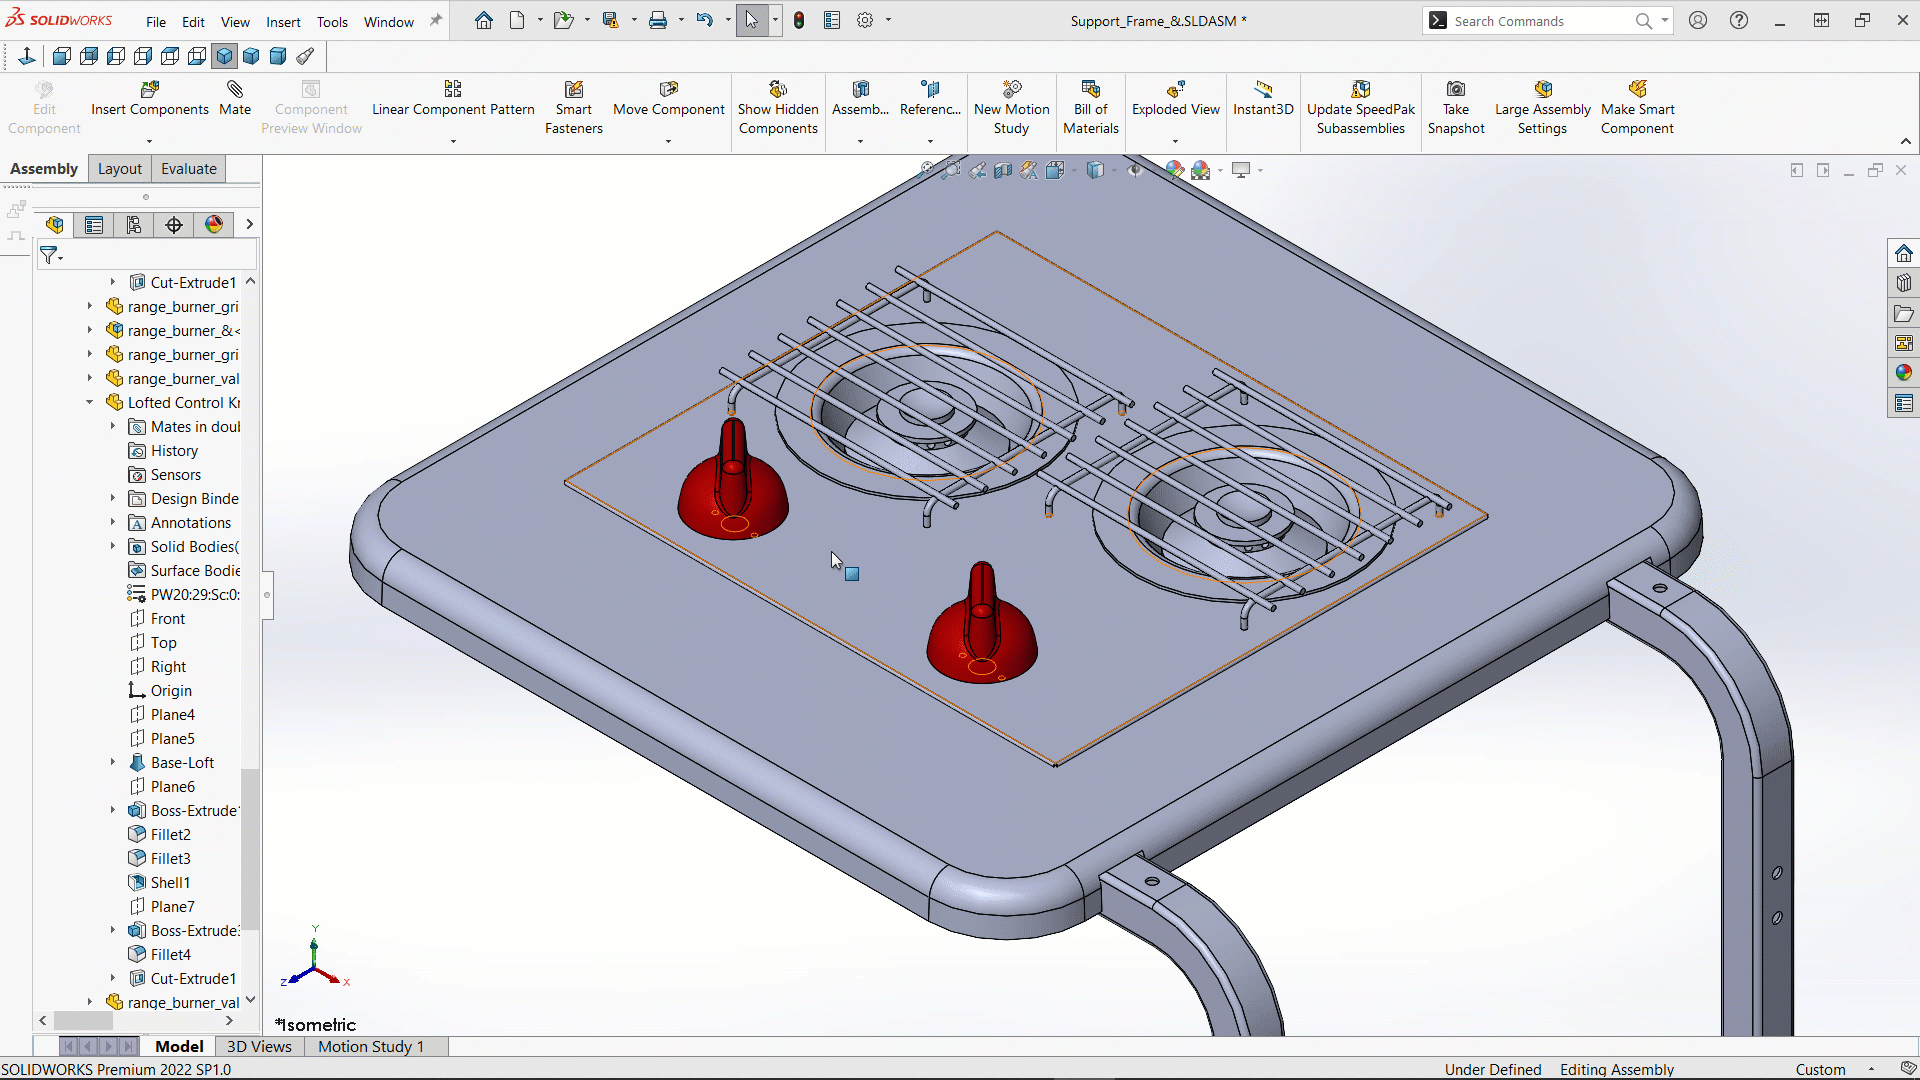 Minimize mouse movement, 4 1/2 Methods to Minimize Mouse Movement in SOLIDWORKS